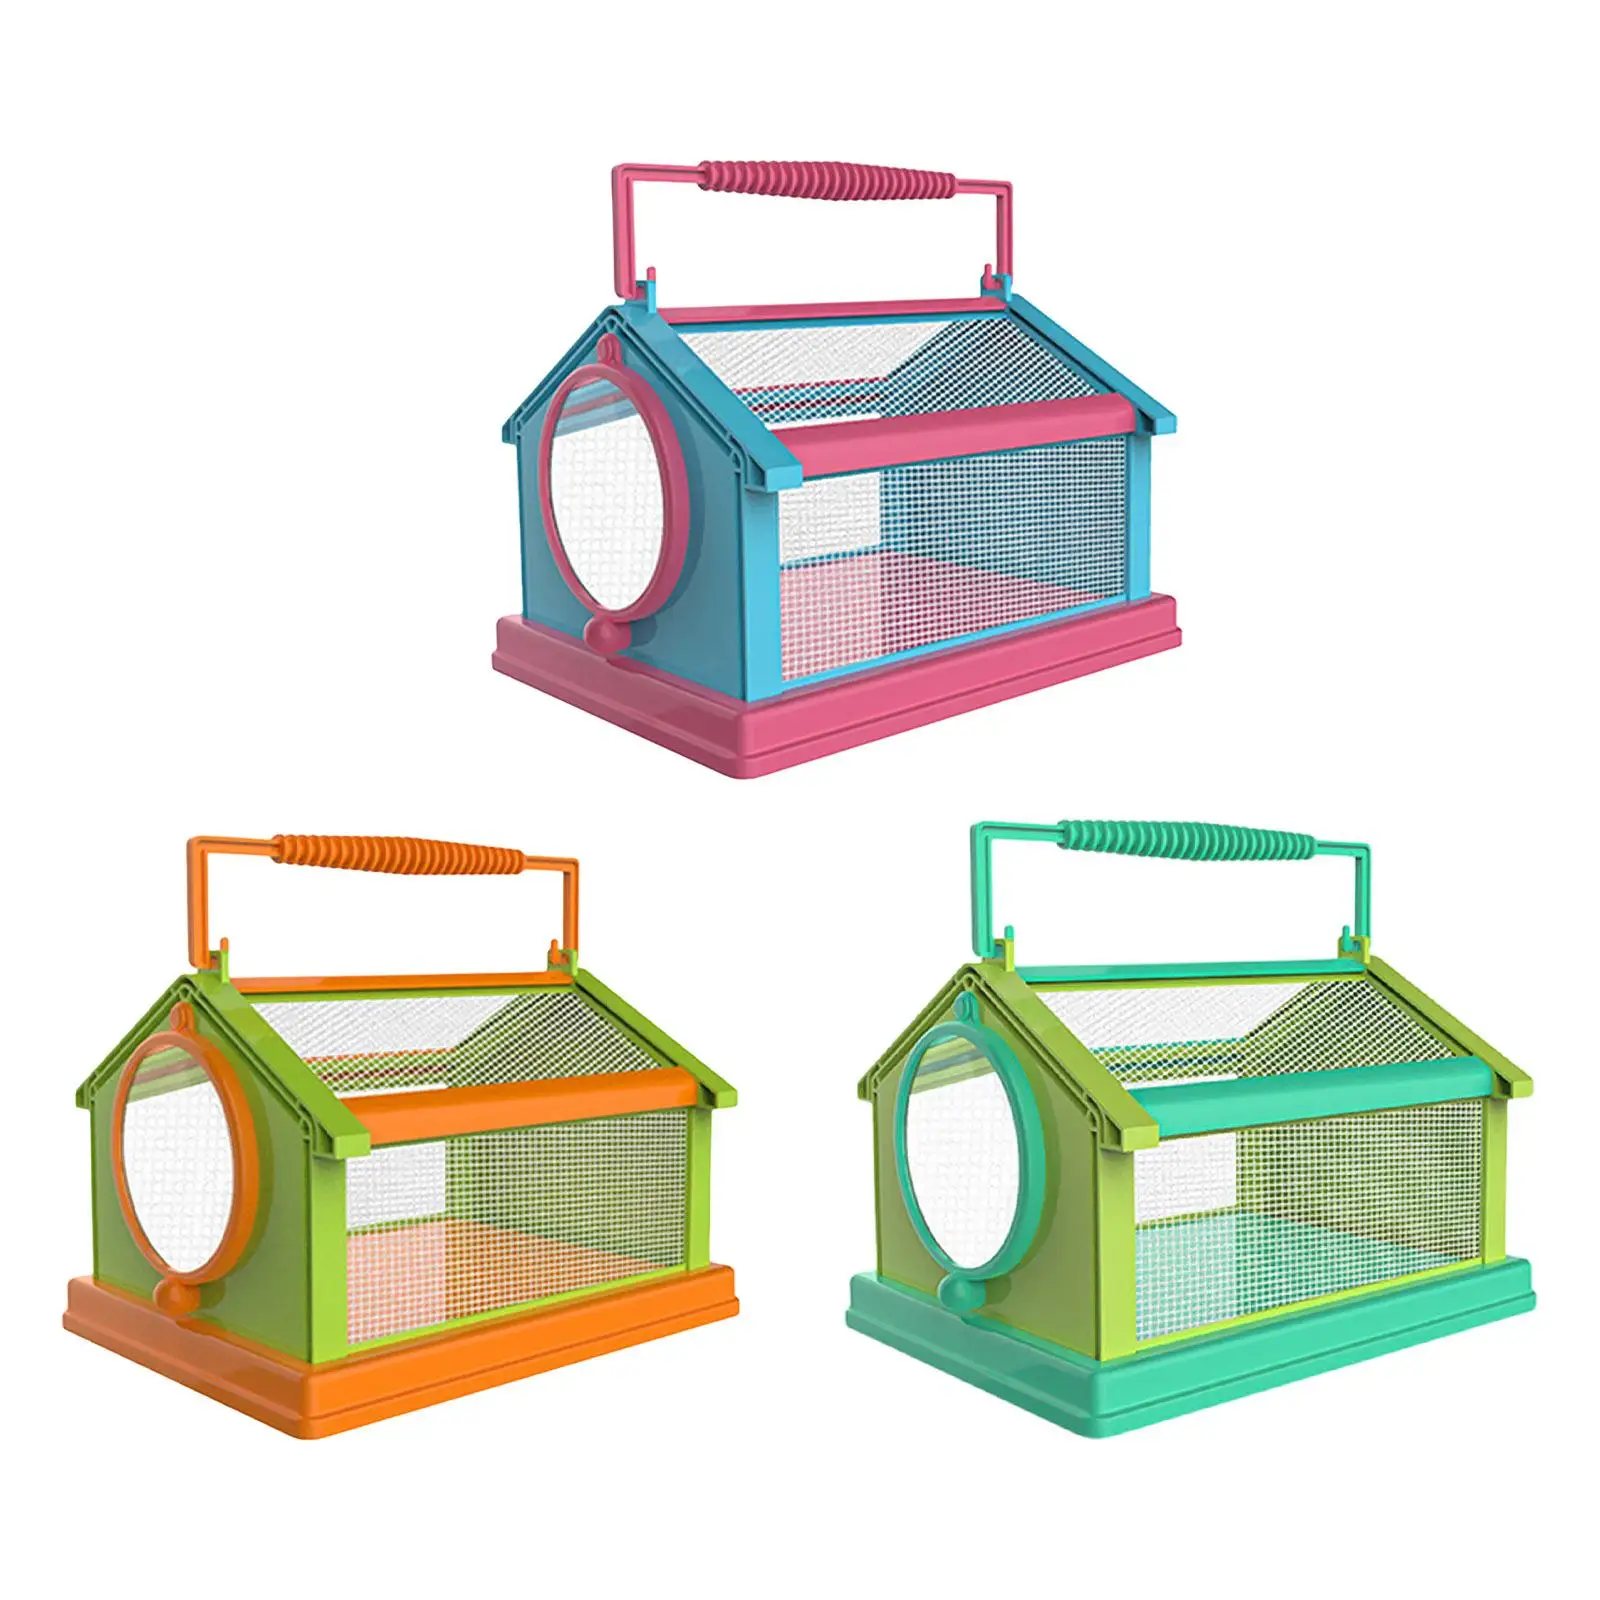 Insect Butterfly Habitat Cage Mesh Cage Collapsible Kids Outdoor Critter with Carrying Handle Nature Science Accessories